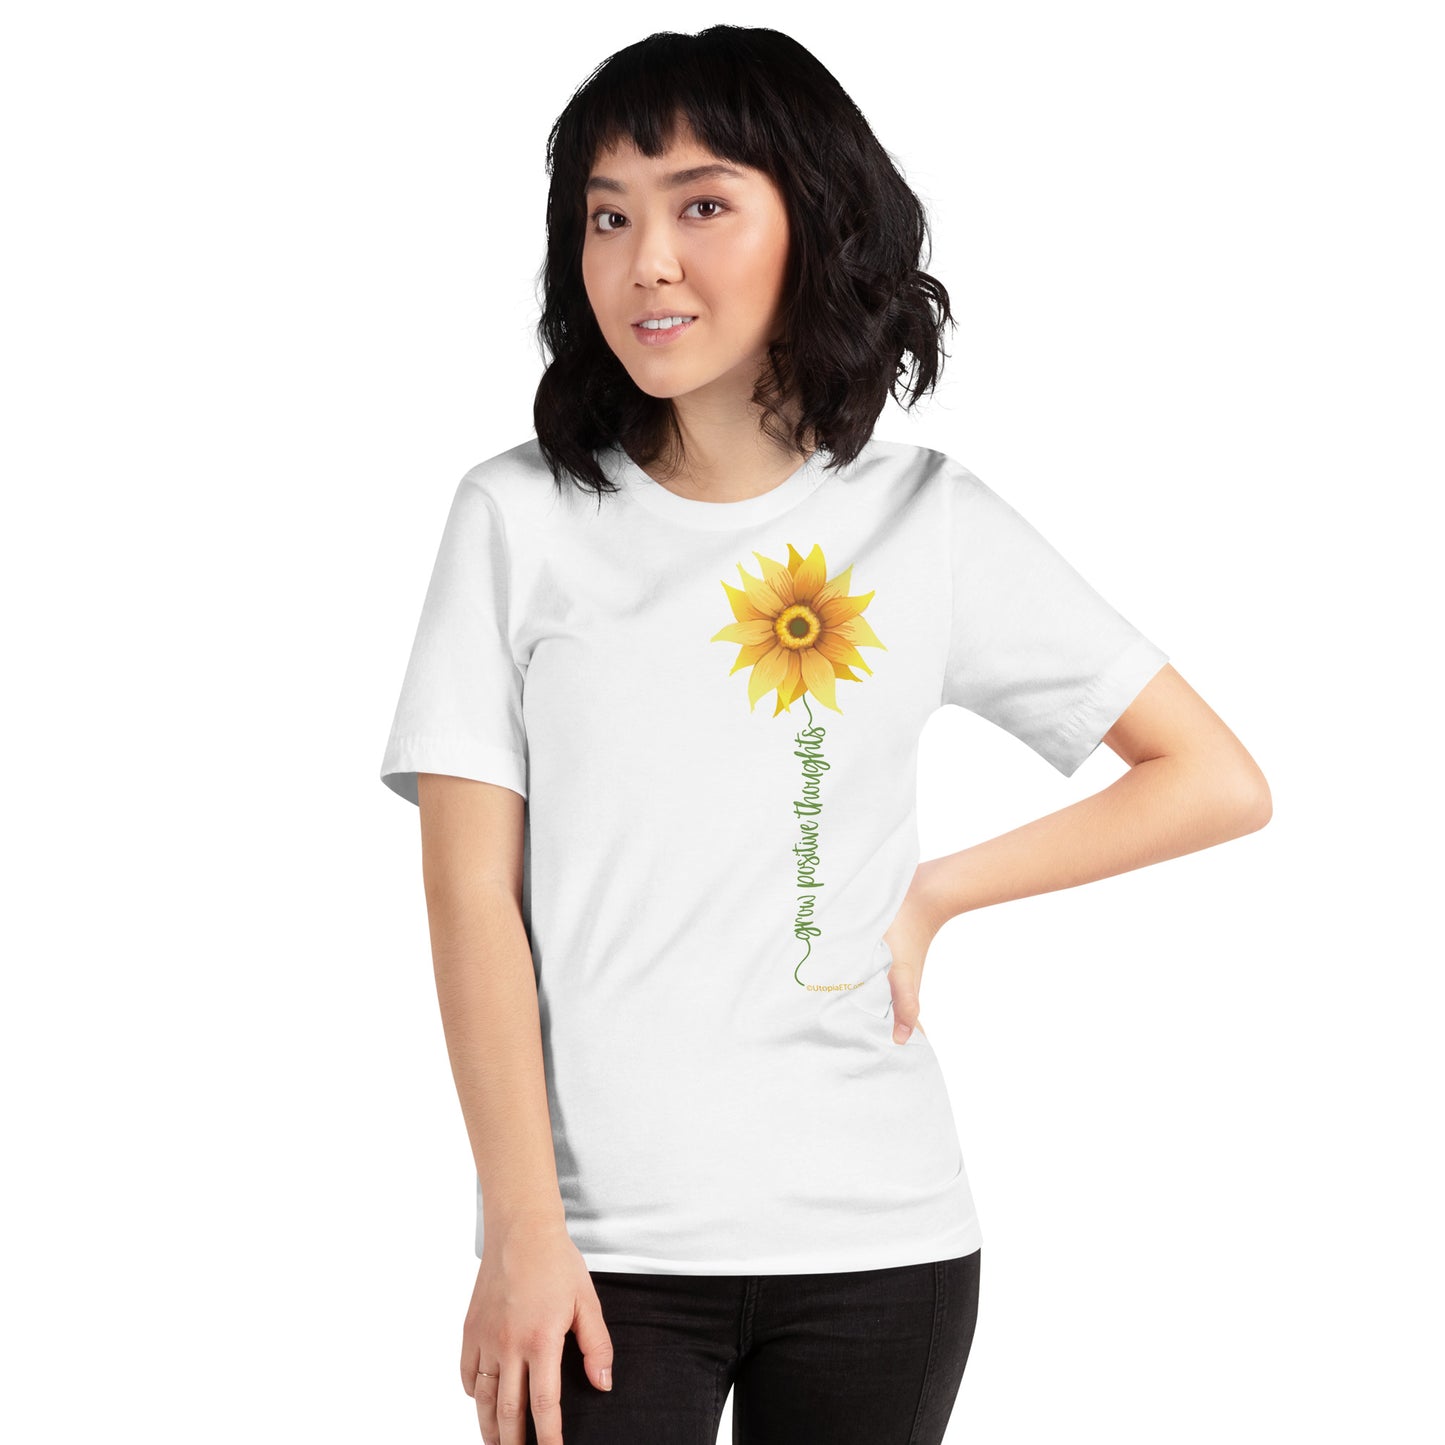 Grow Positive Thoughts P306 Unisex T-shirt